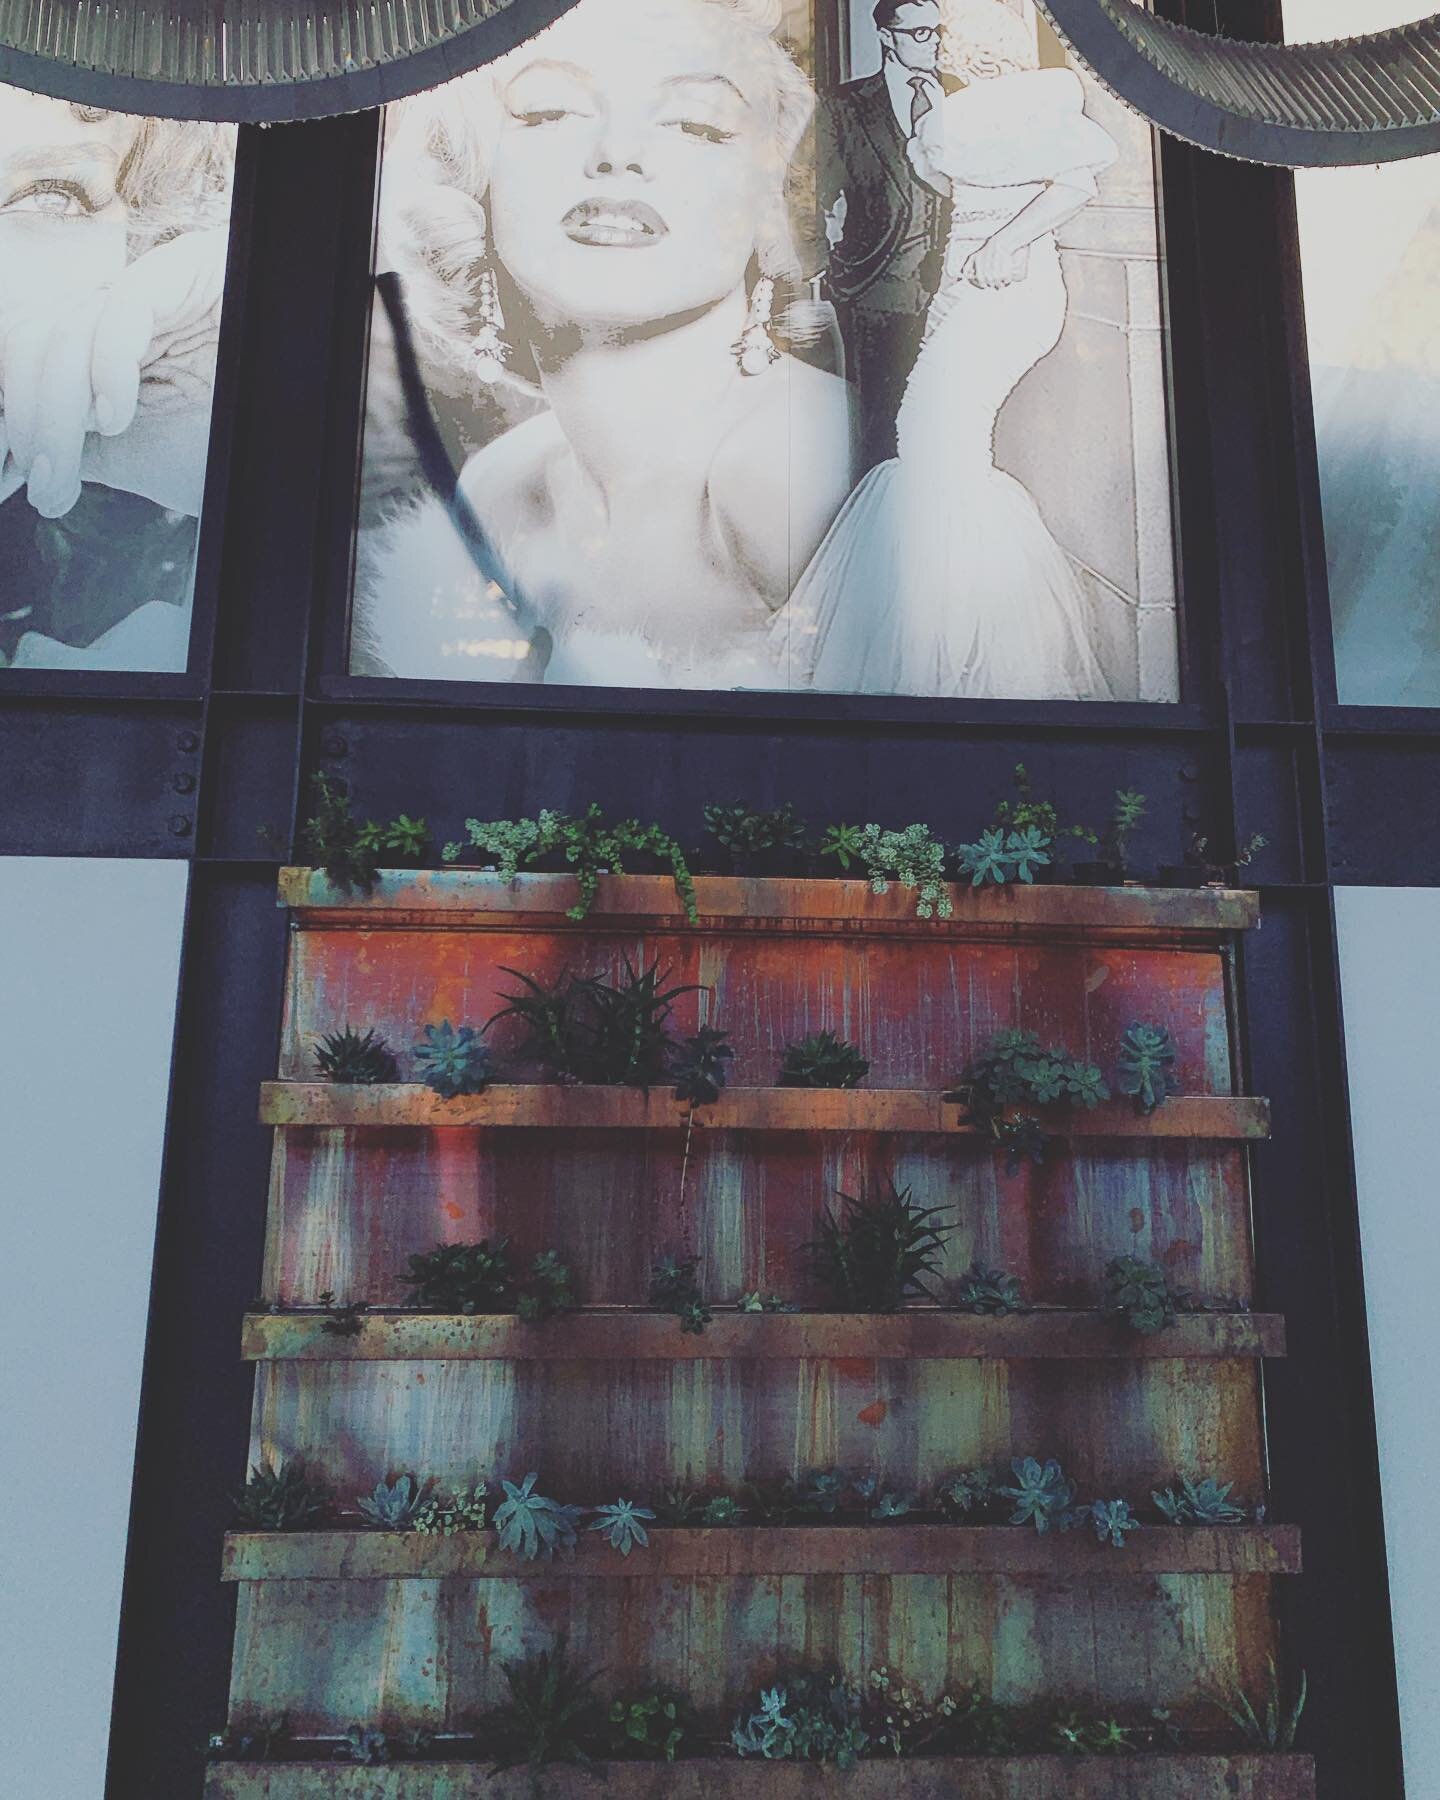 I&rsquo;m always looking for the beautiful photo ops, succulent wall on distressed copper meets H&amp;S pls Hollywood art at @palmsophiarooftop #culvercity #laeventspace #rooftopwedding #larooftop